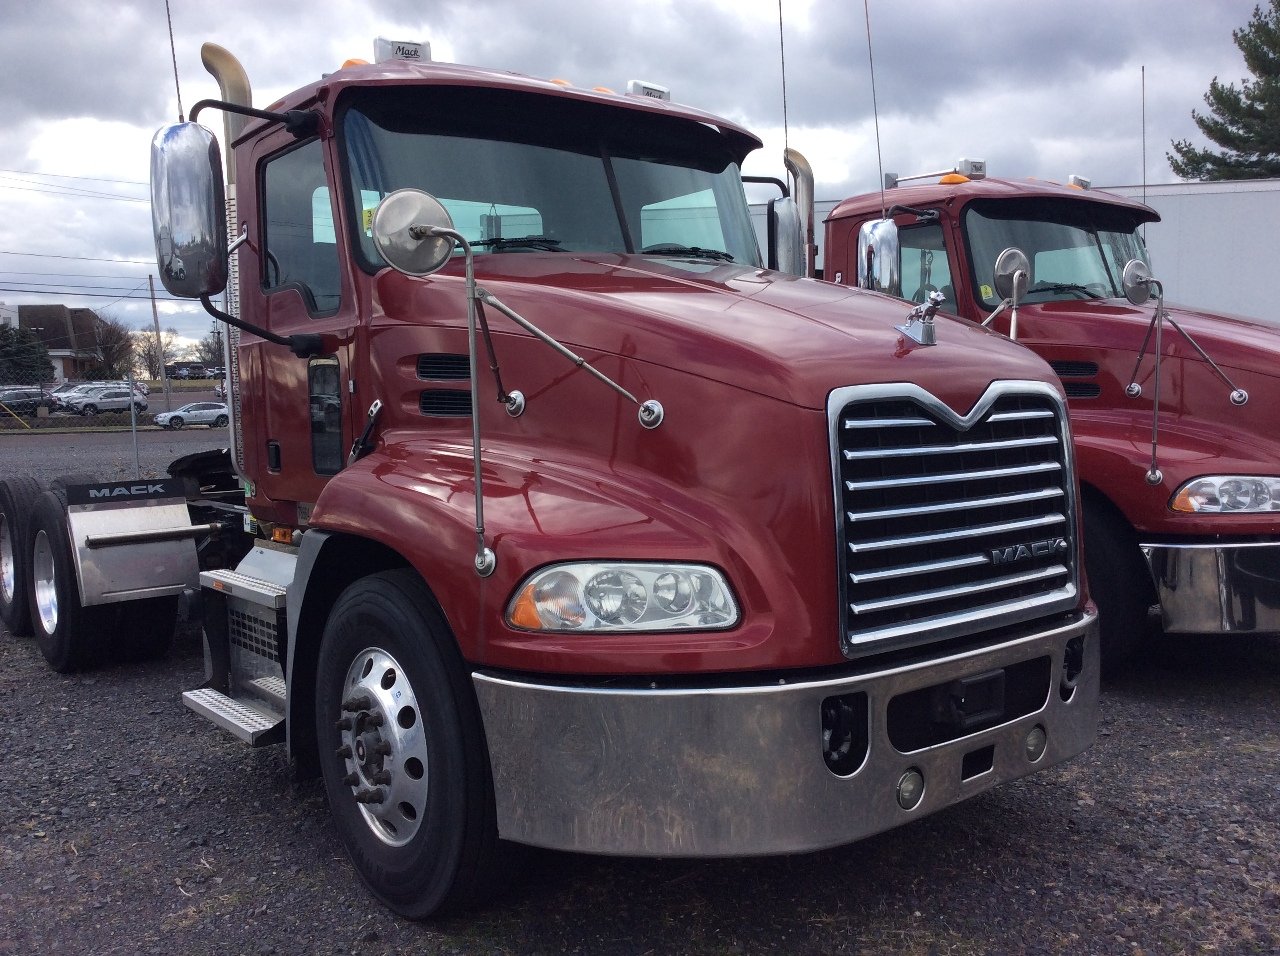 Used Truck Inventory - 1001883 02 2 - 149